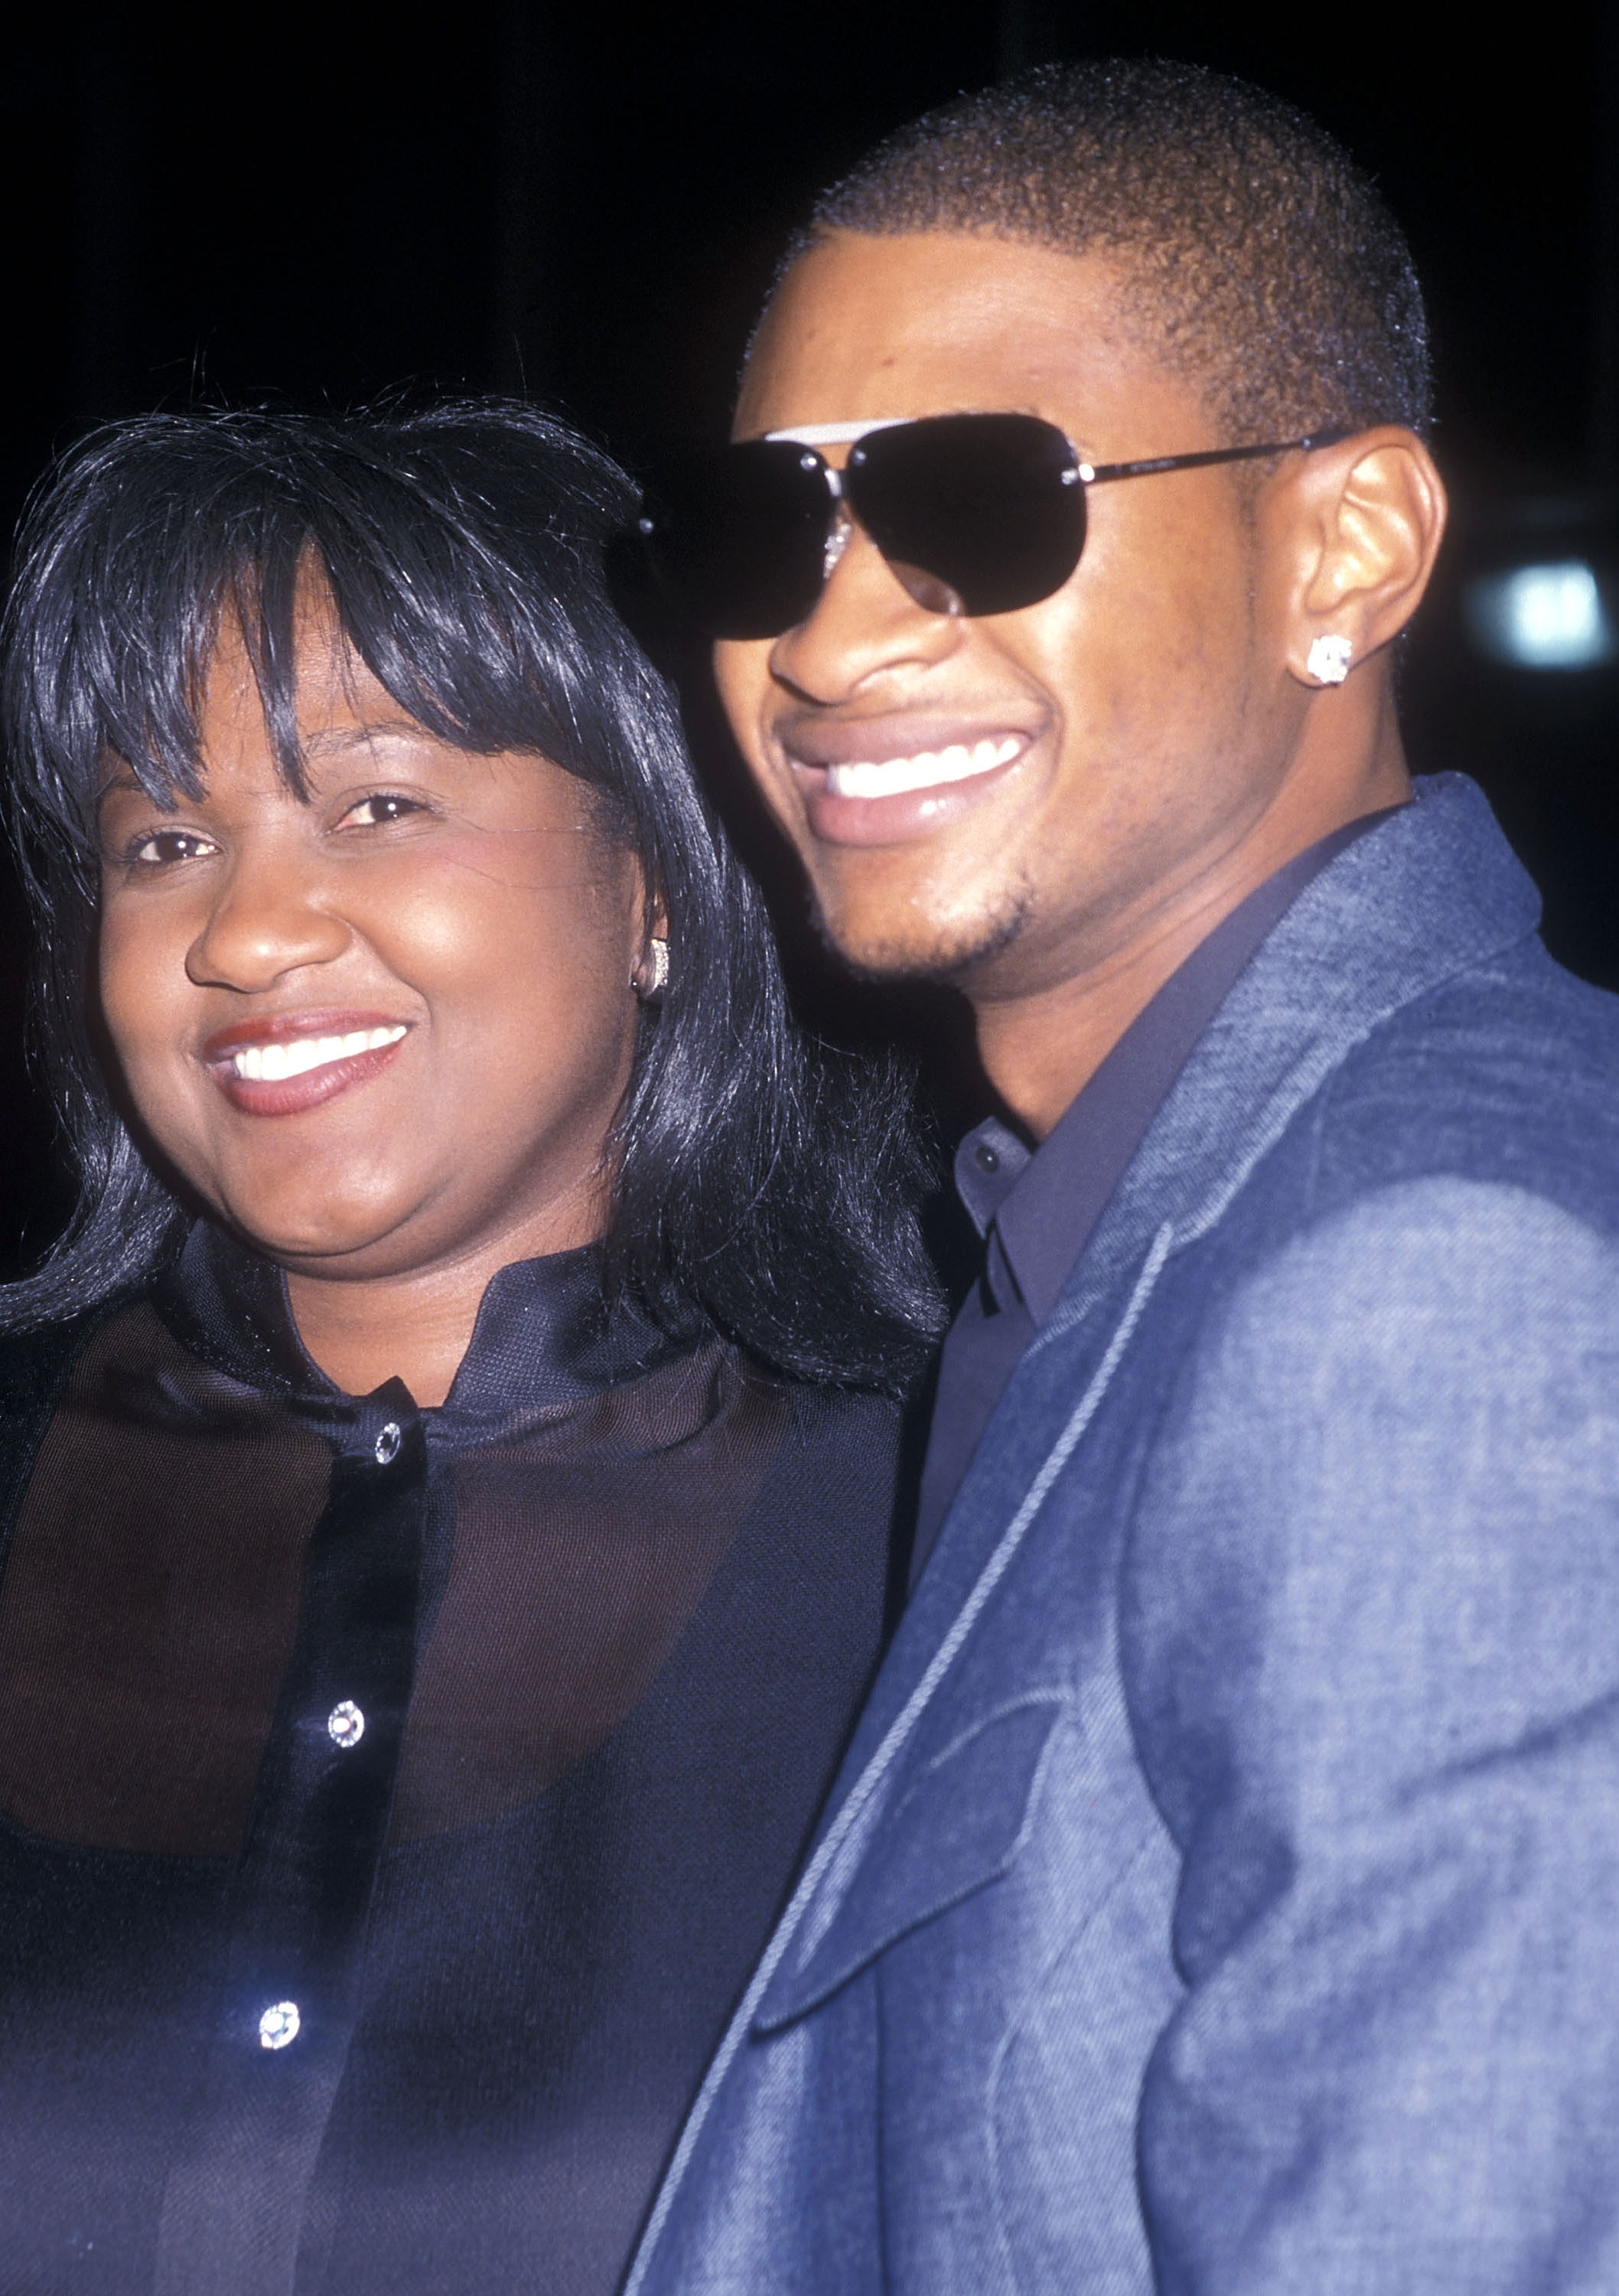 Jonnetta Patton and Usher at the "Michael Jackson: 30th Anniversary Celebration" Concert Special on September 7, 2001, in New York City. | Source: Getty Images